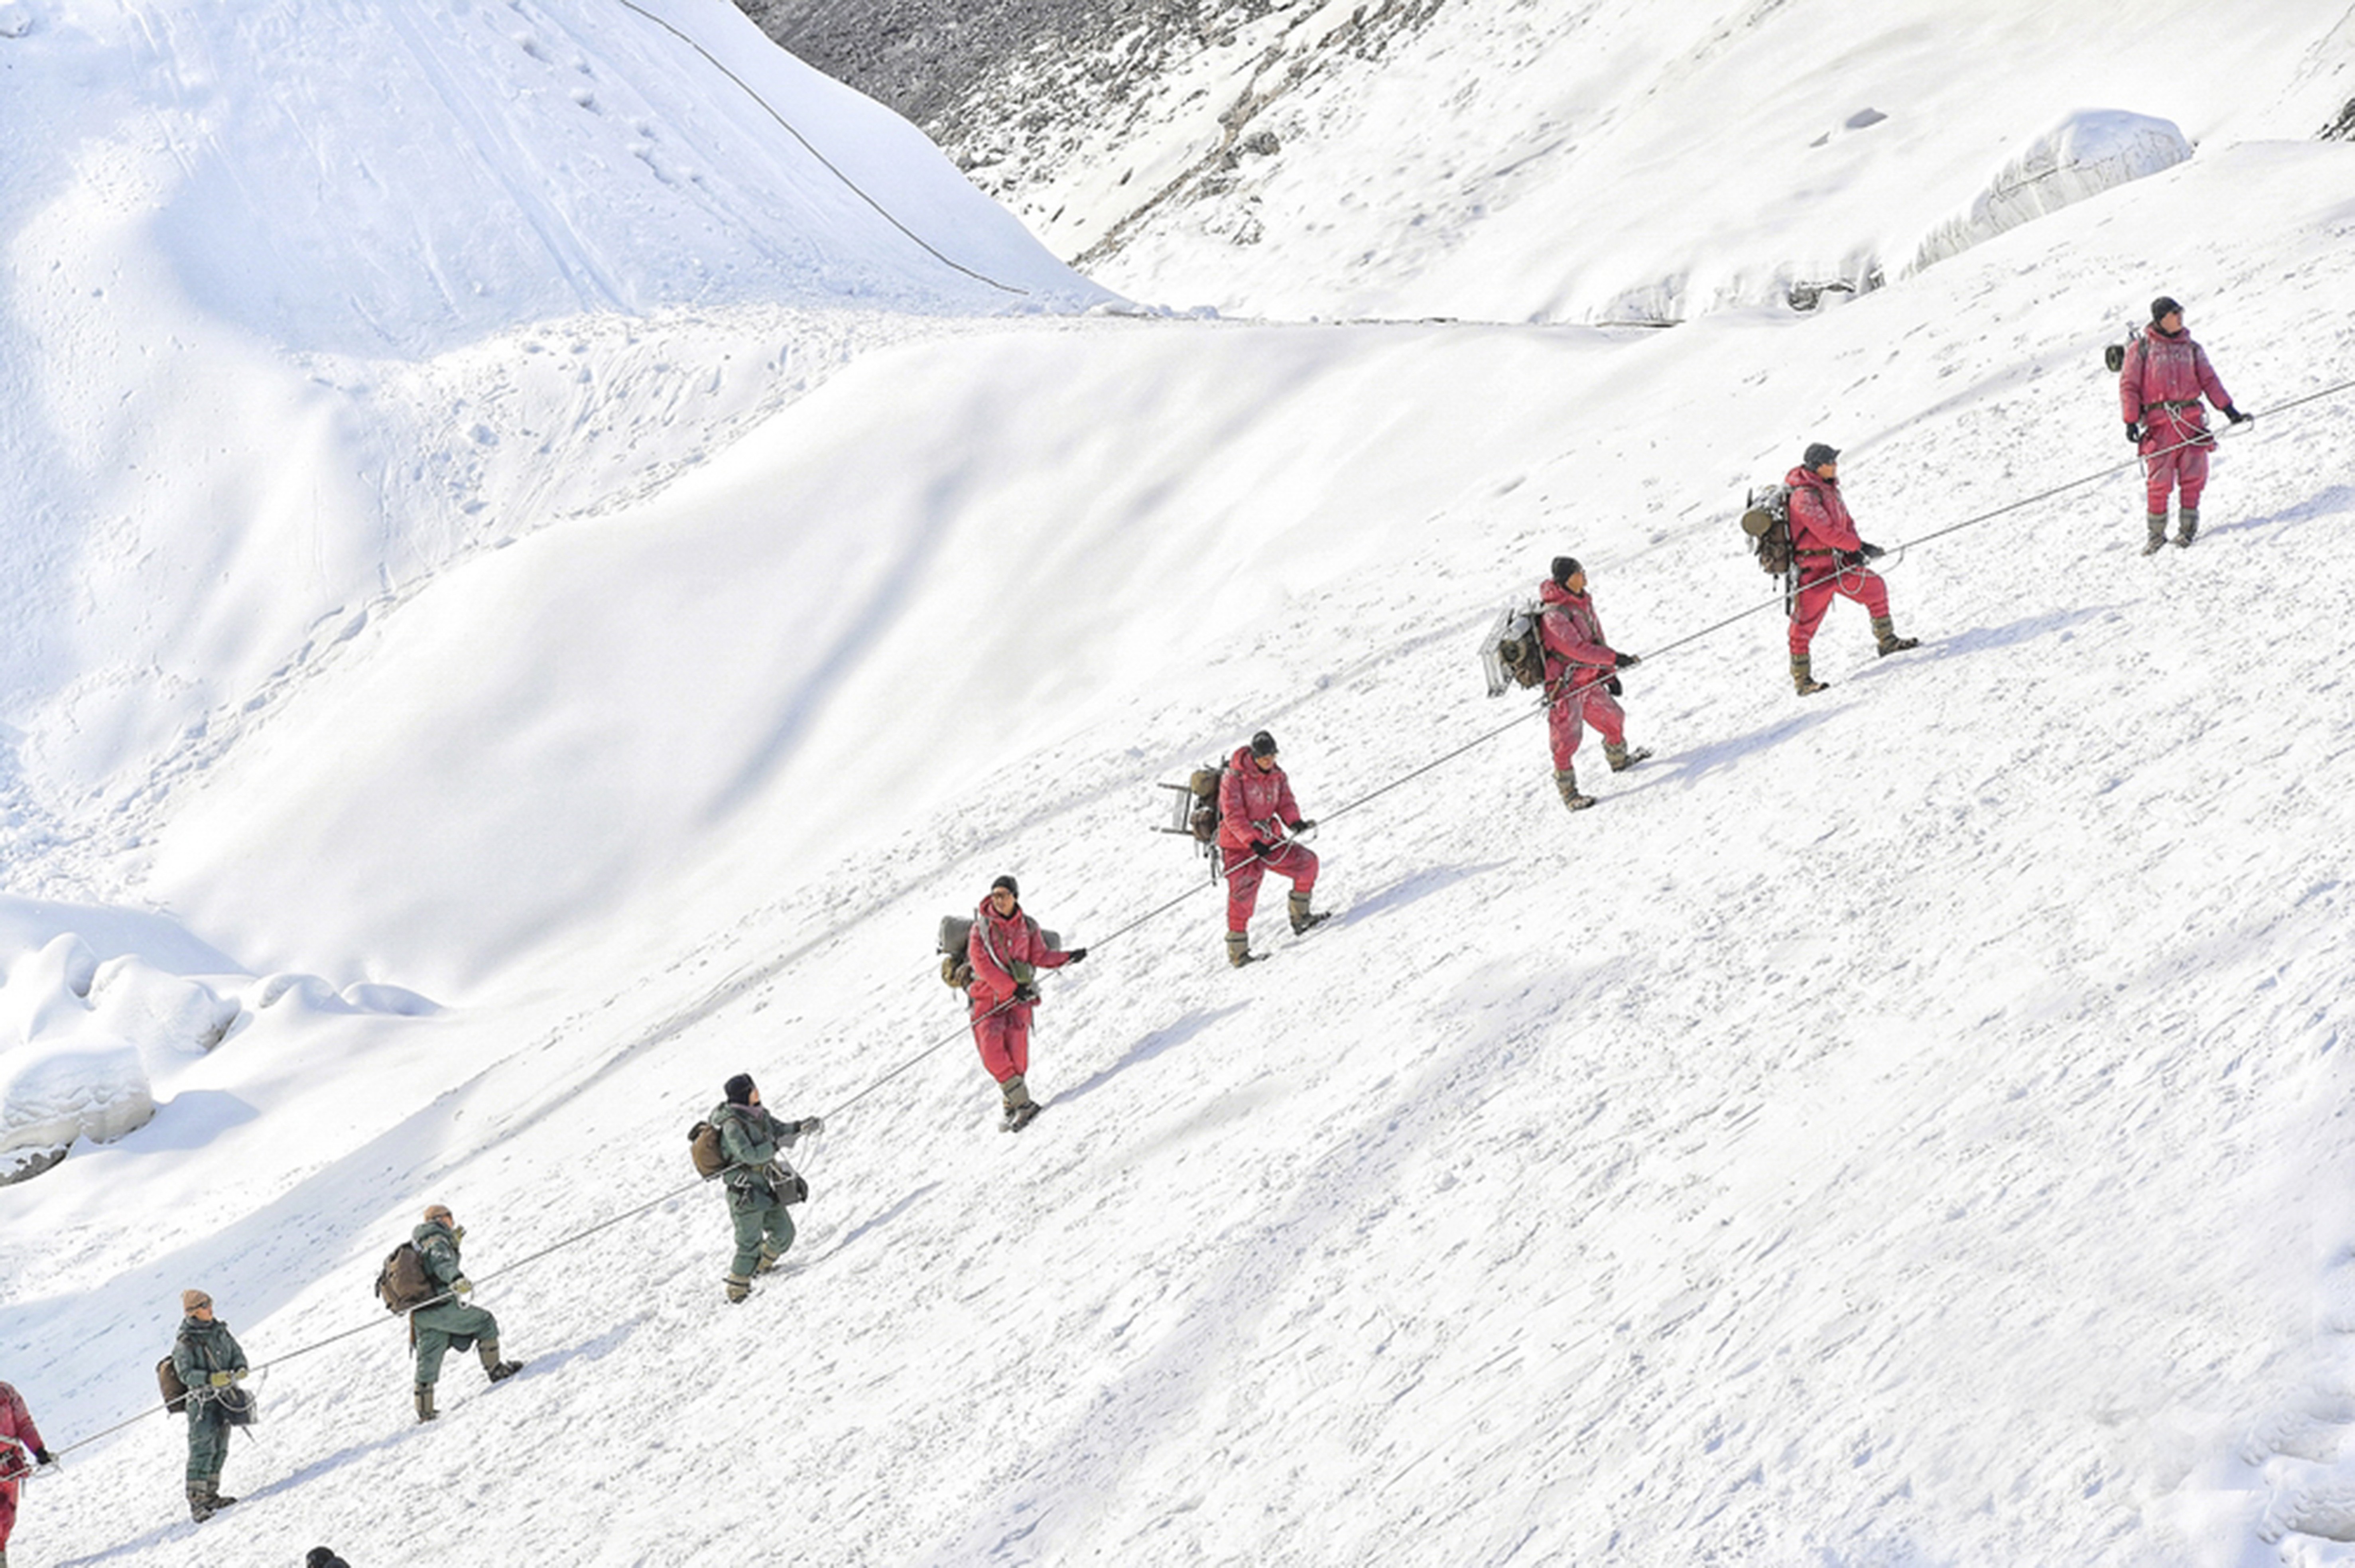 A still from The Climbers, one of three patriotic blockbusters recently released in China.